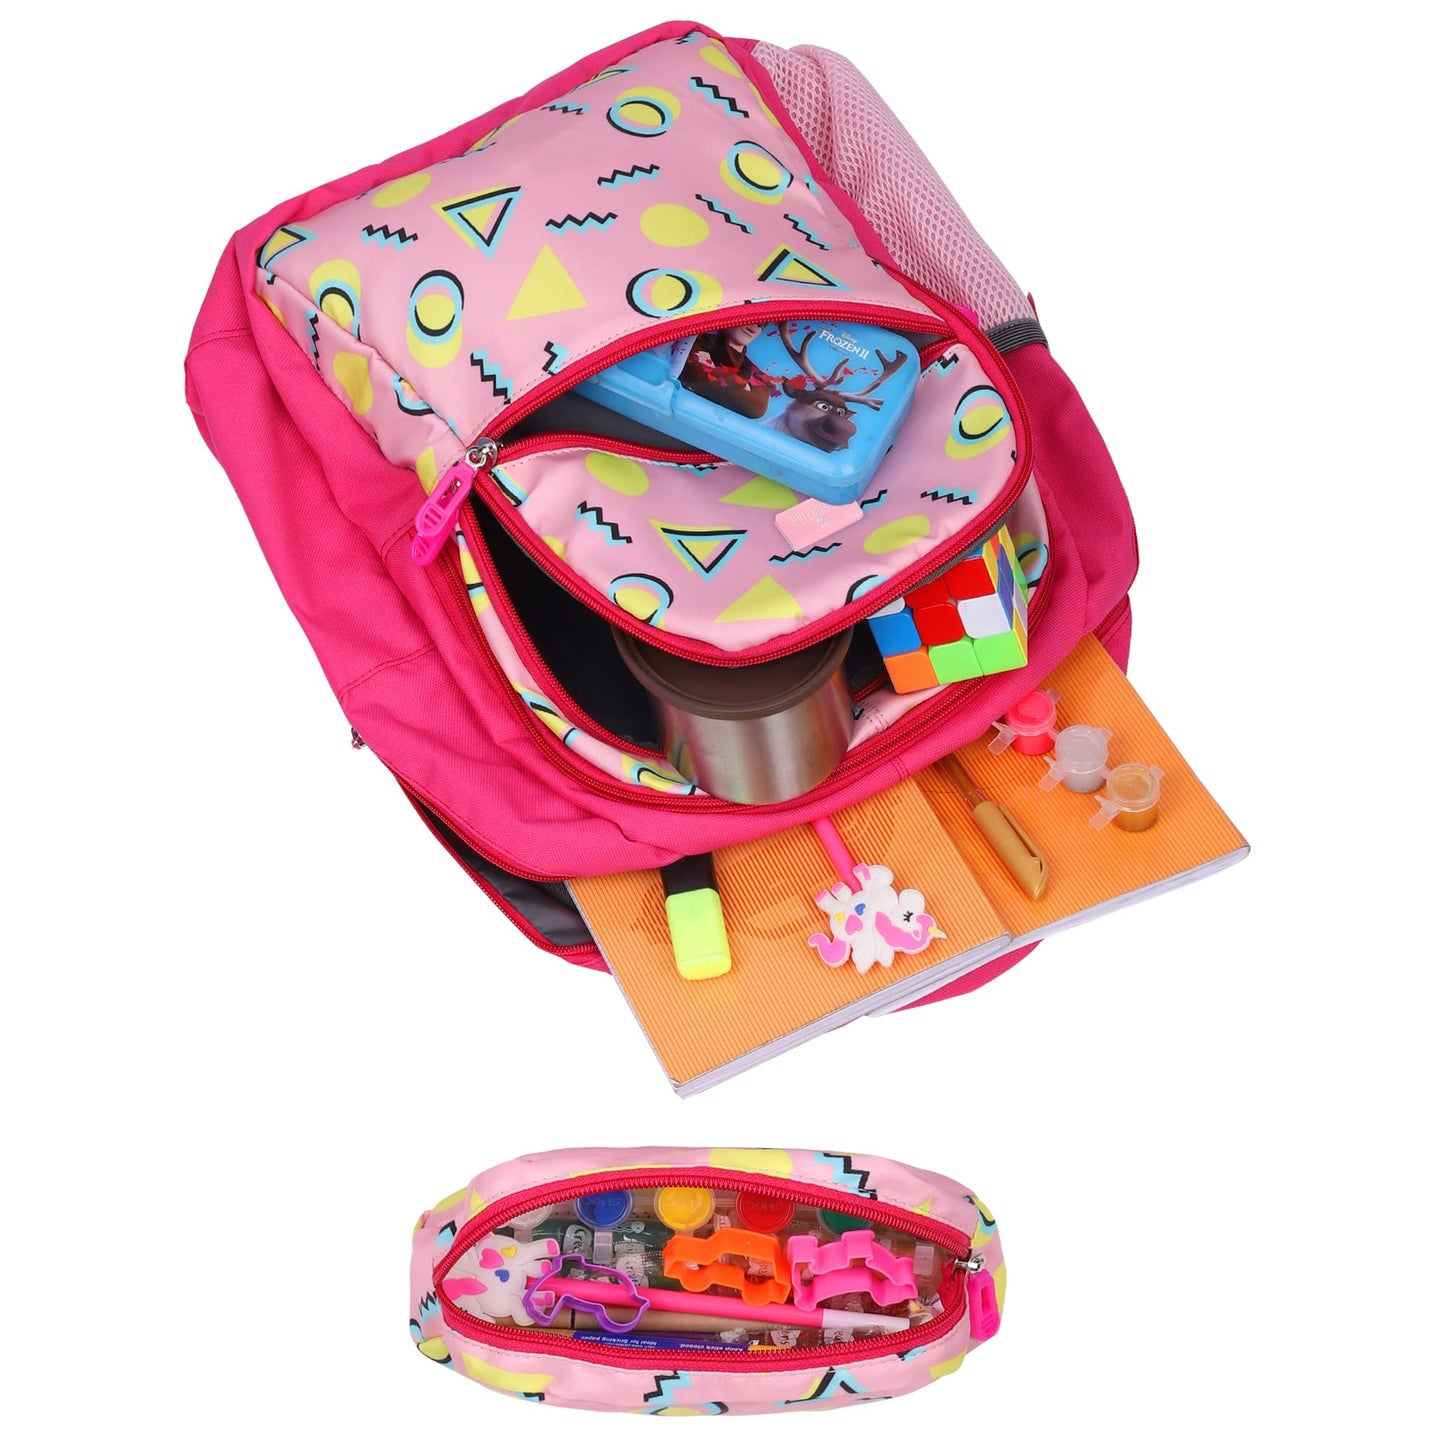 THE CLOWNFISH Brainbox Series Printed Polyester 30 L Standard Backpack With Pencil/Staionery Pouch School Bag Front Cross Zip Pocket Daypack Picnic Bag For Boys & Girls, Age 8-10 Years (Rose Pink)